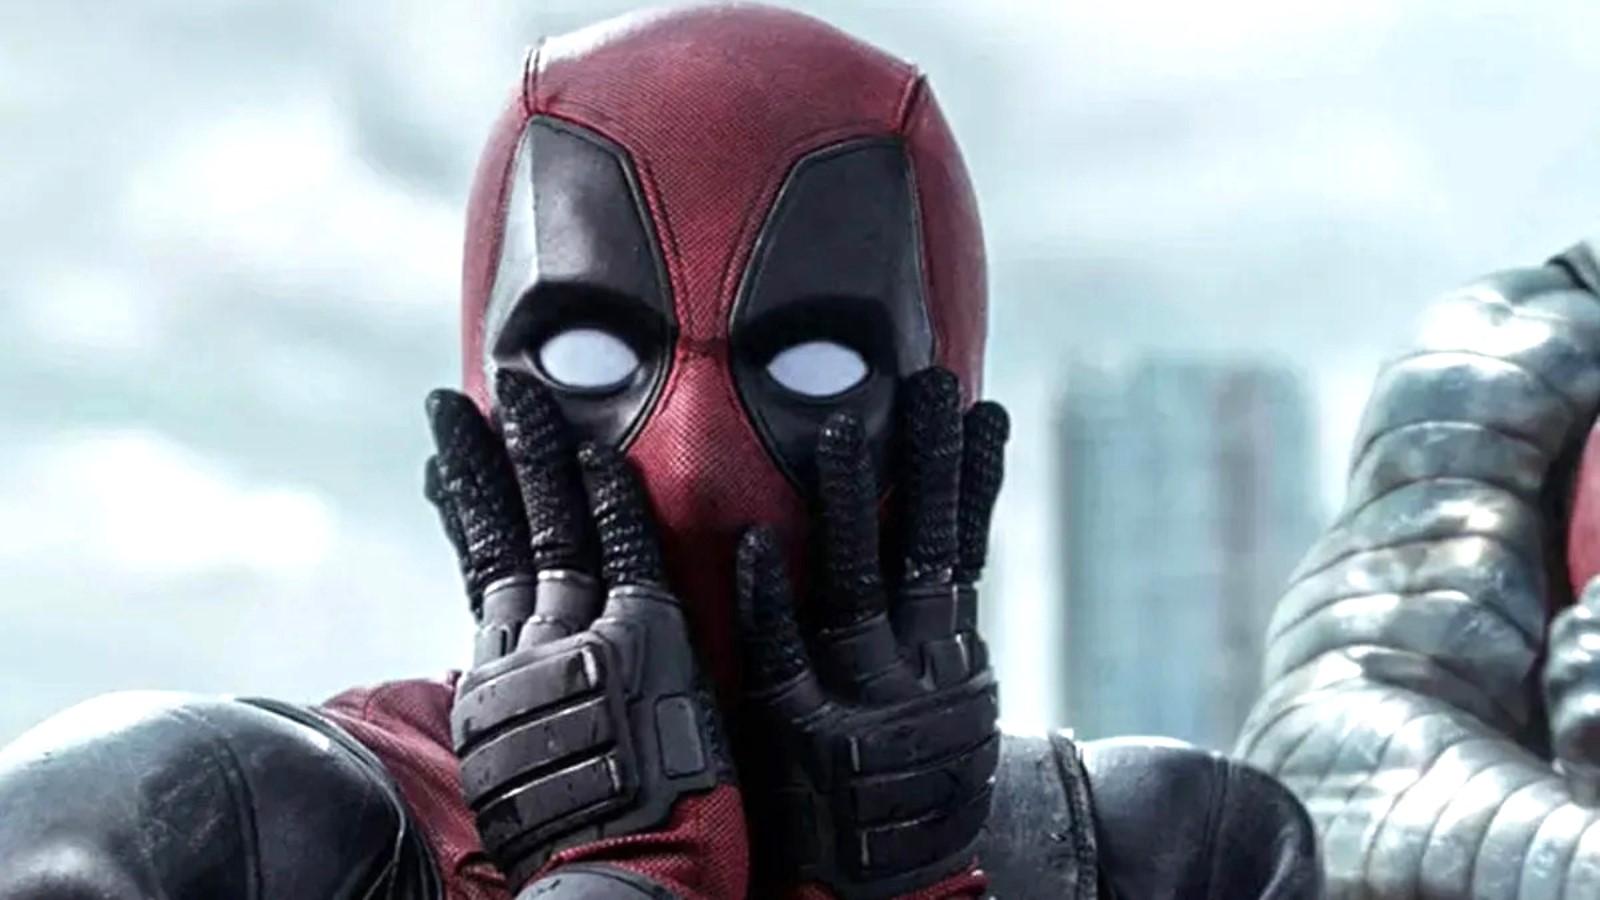 Ryan Reynolds as Deadpool, pressing his hands against his face